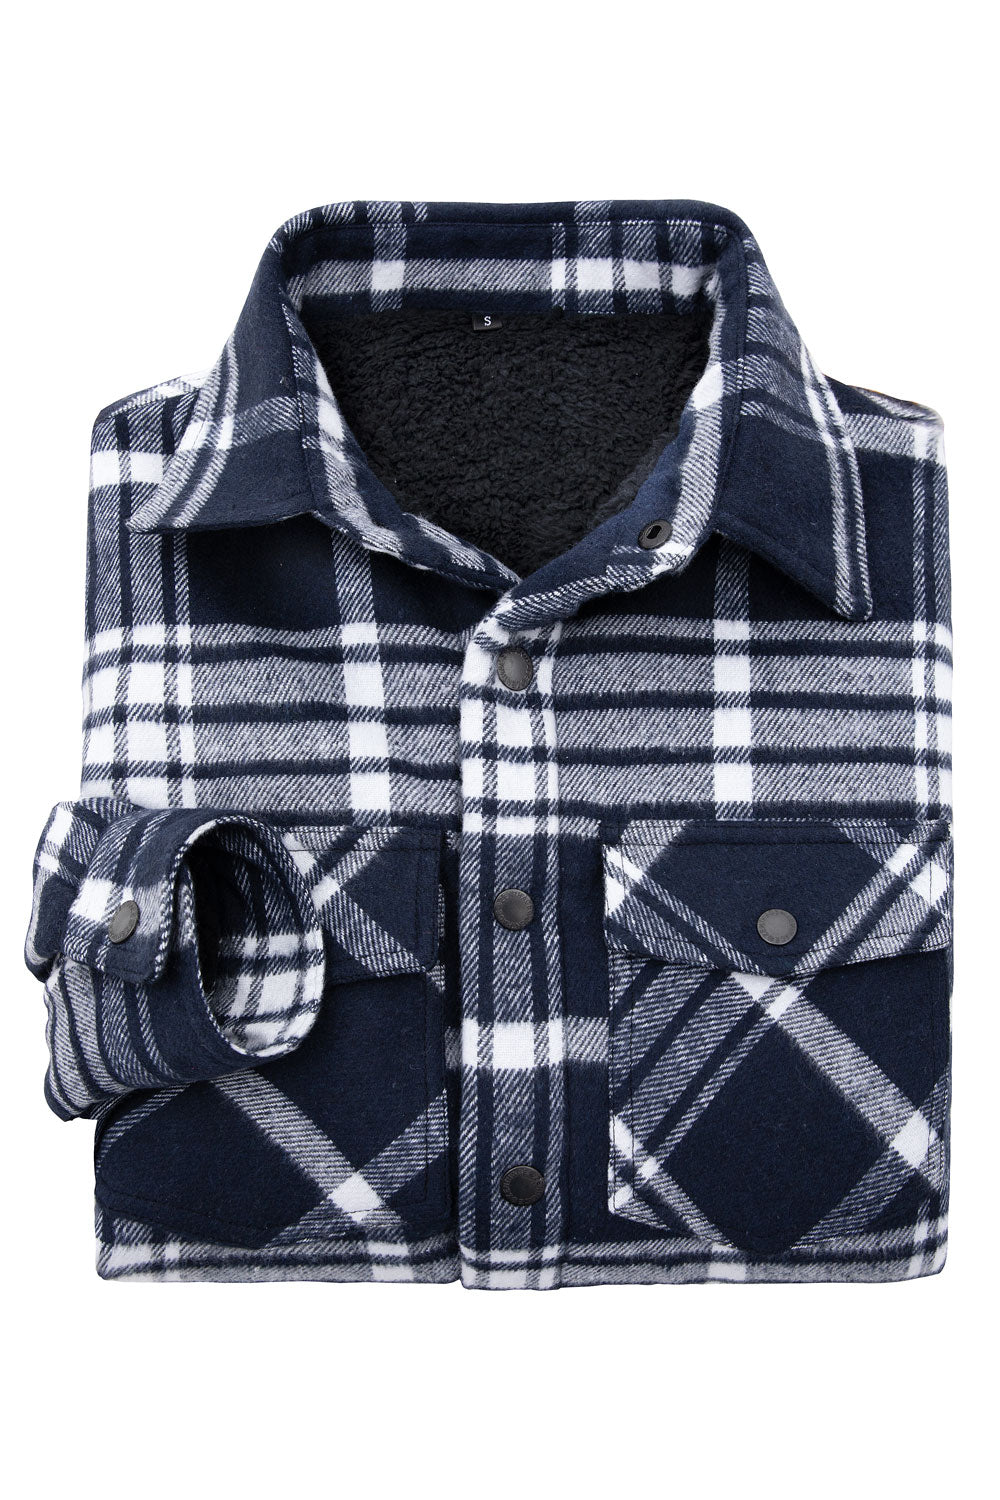 Men's Sherpa Lined Thick Flannel Shirt Jacket,Snap Plaid Flannel Jac